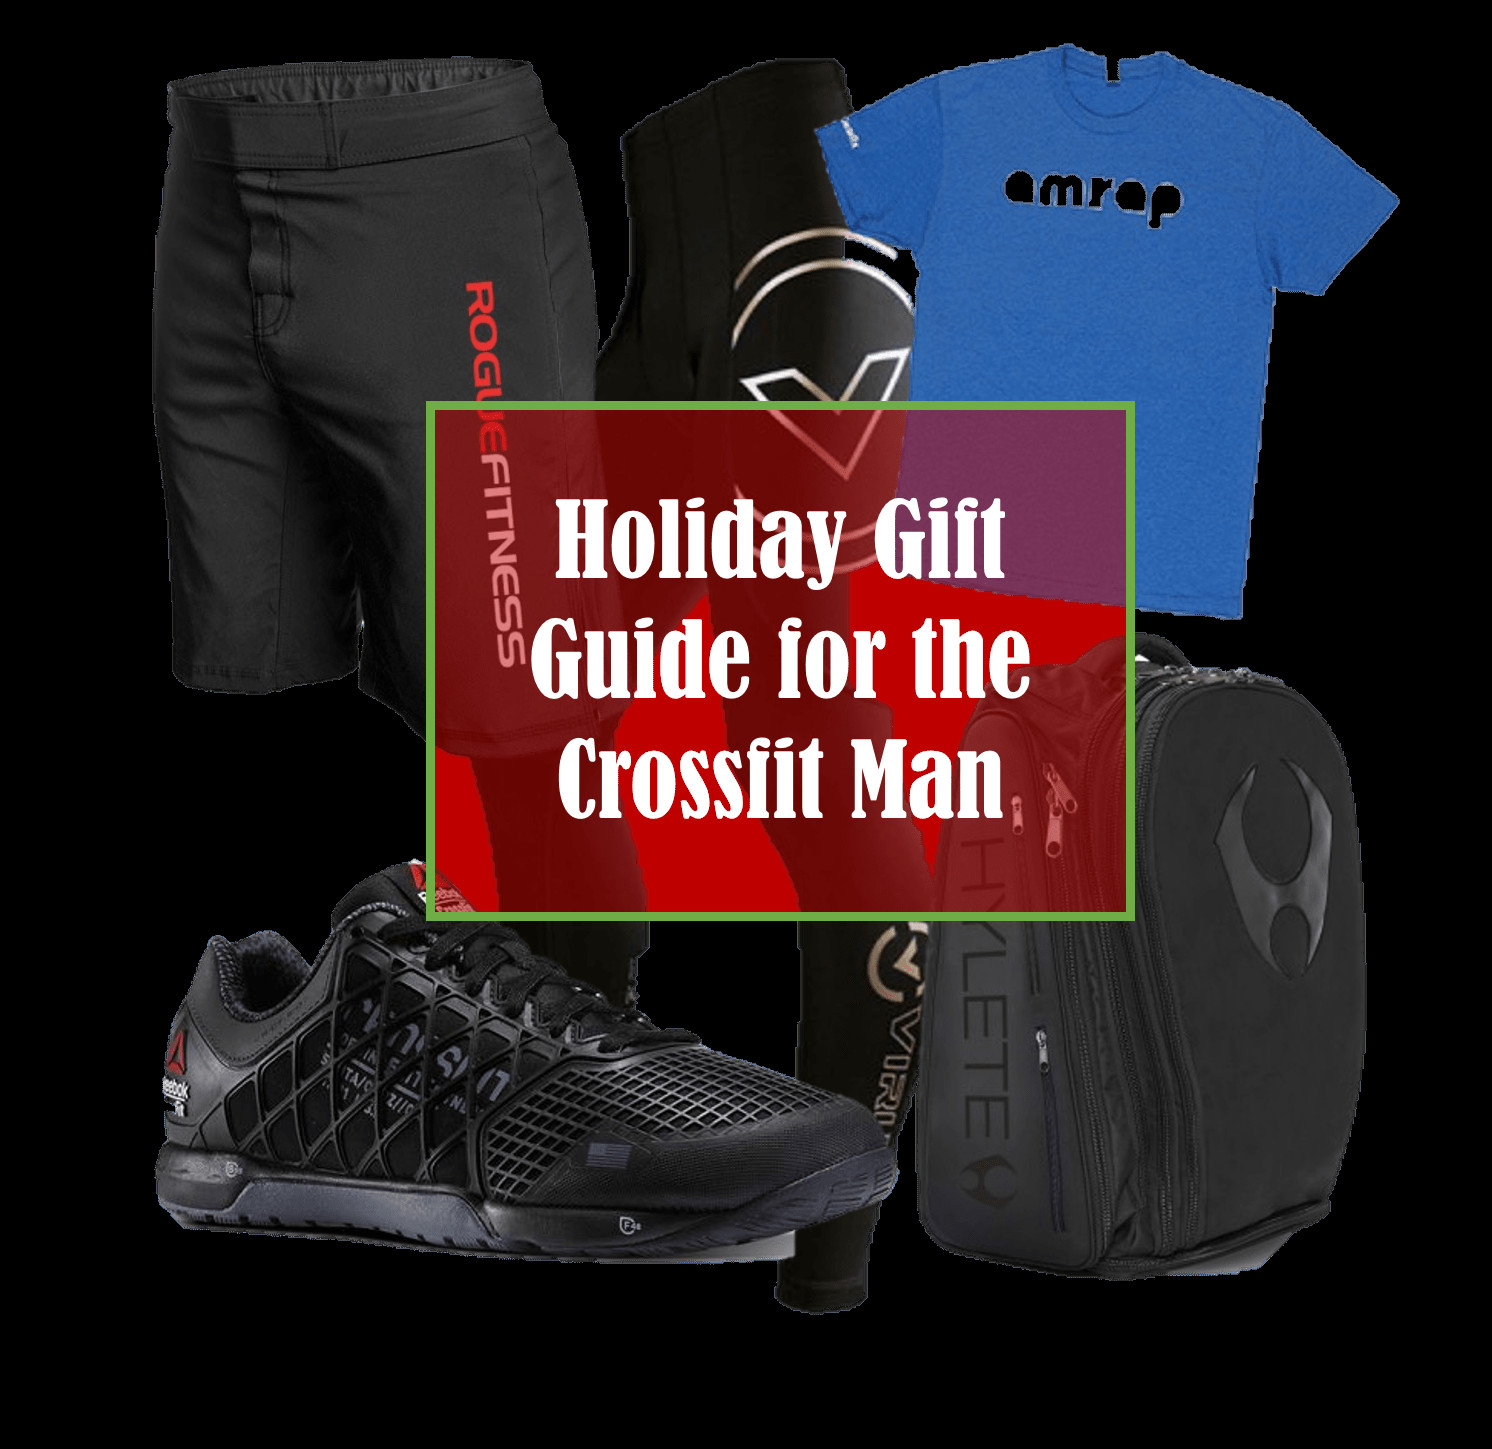 Best ideas about Gift Ideas For Weightlifters
. Save or Pin Holiday Gift Guide The Crossfit Man Wine to Weightlifting Now.